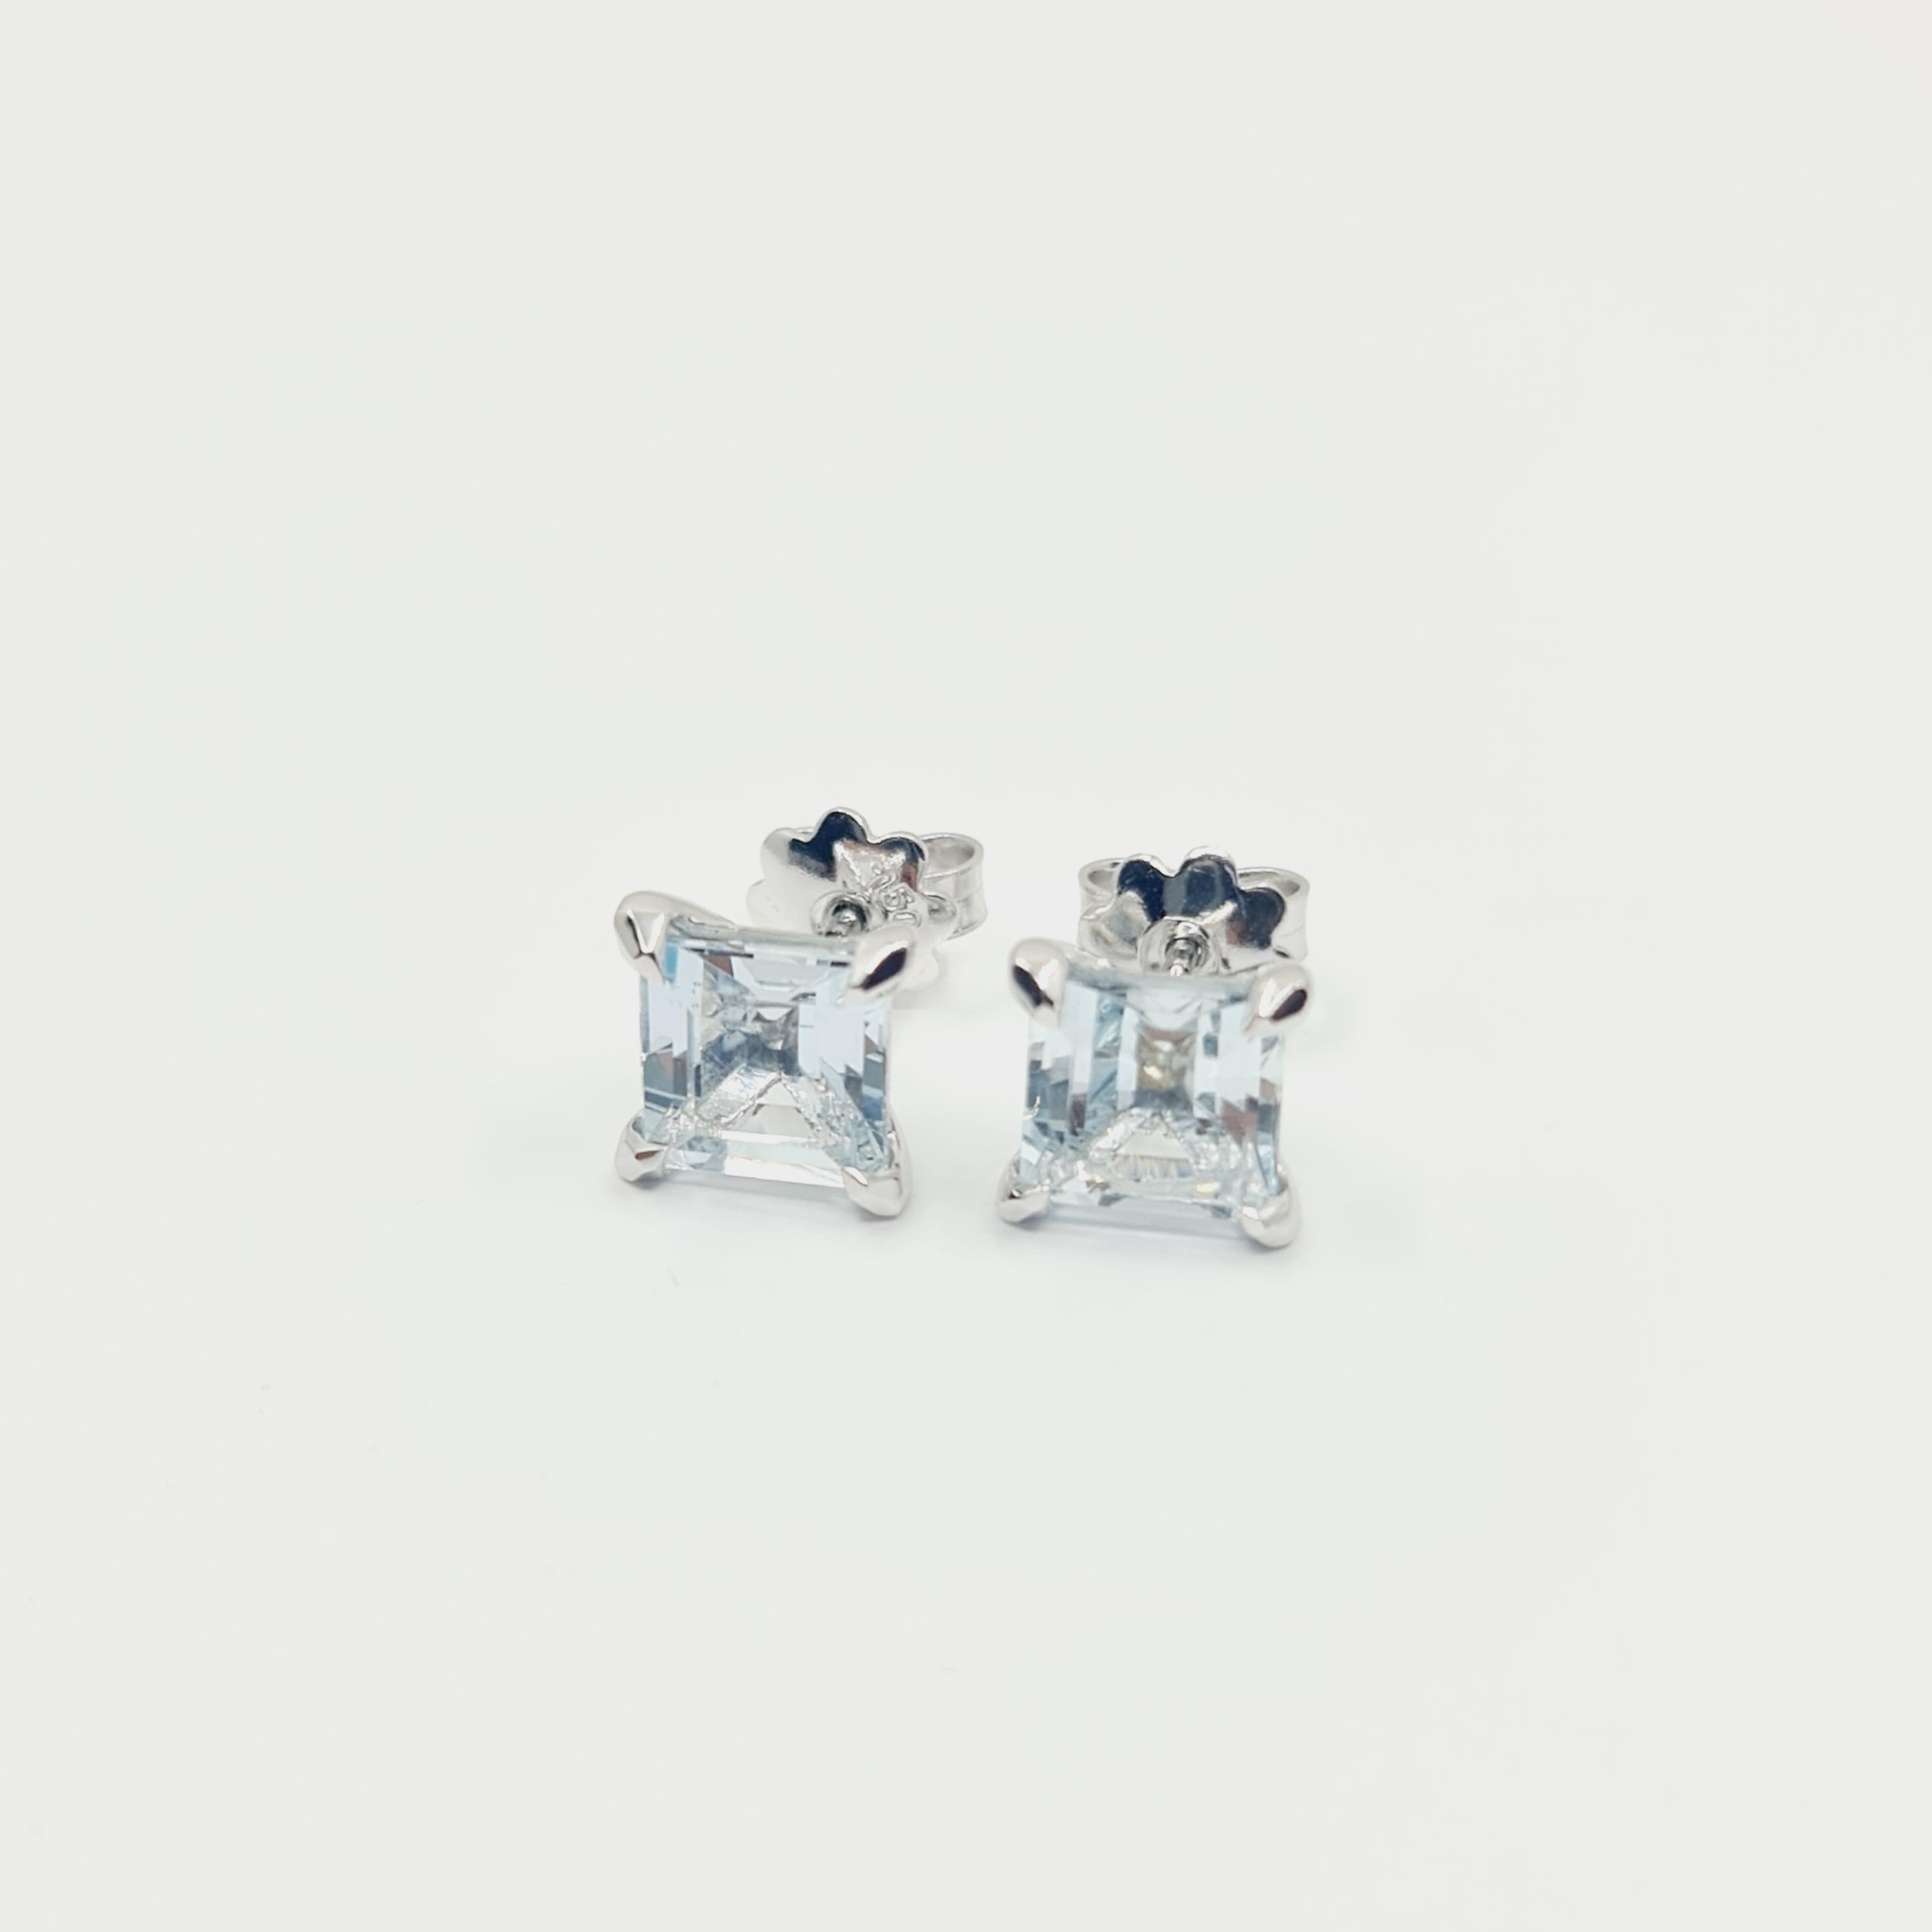 18K White Gold Aquamarine Studs 3.60 Carat 1.1x1.1cm
2x 1.80ct Square Cut Aquamarine Stones. 
High Gloss Polish. Rhodium Plated.

Made on demand in Germany. 
Production time 2-3 weeks.
Feel free to contact us if any questions may arise.

You are